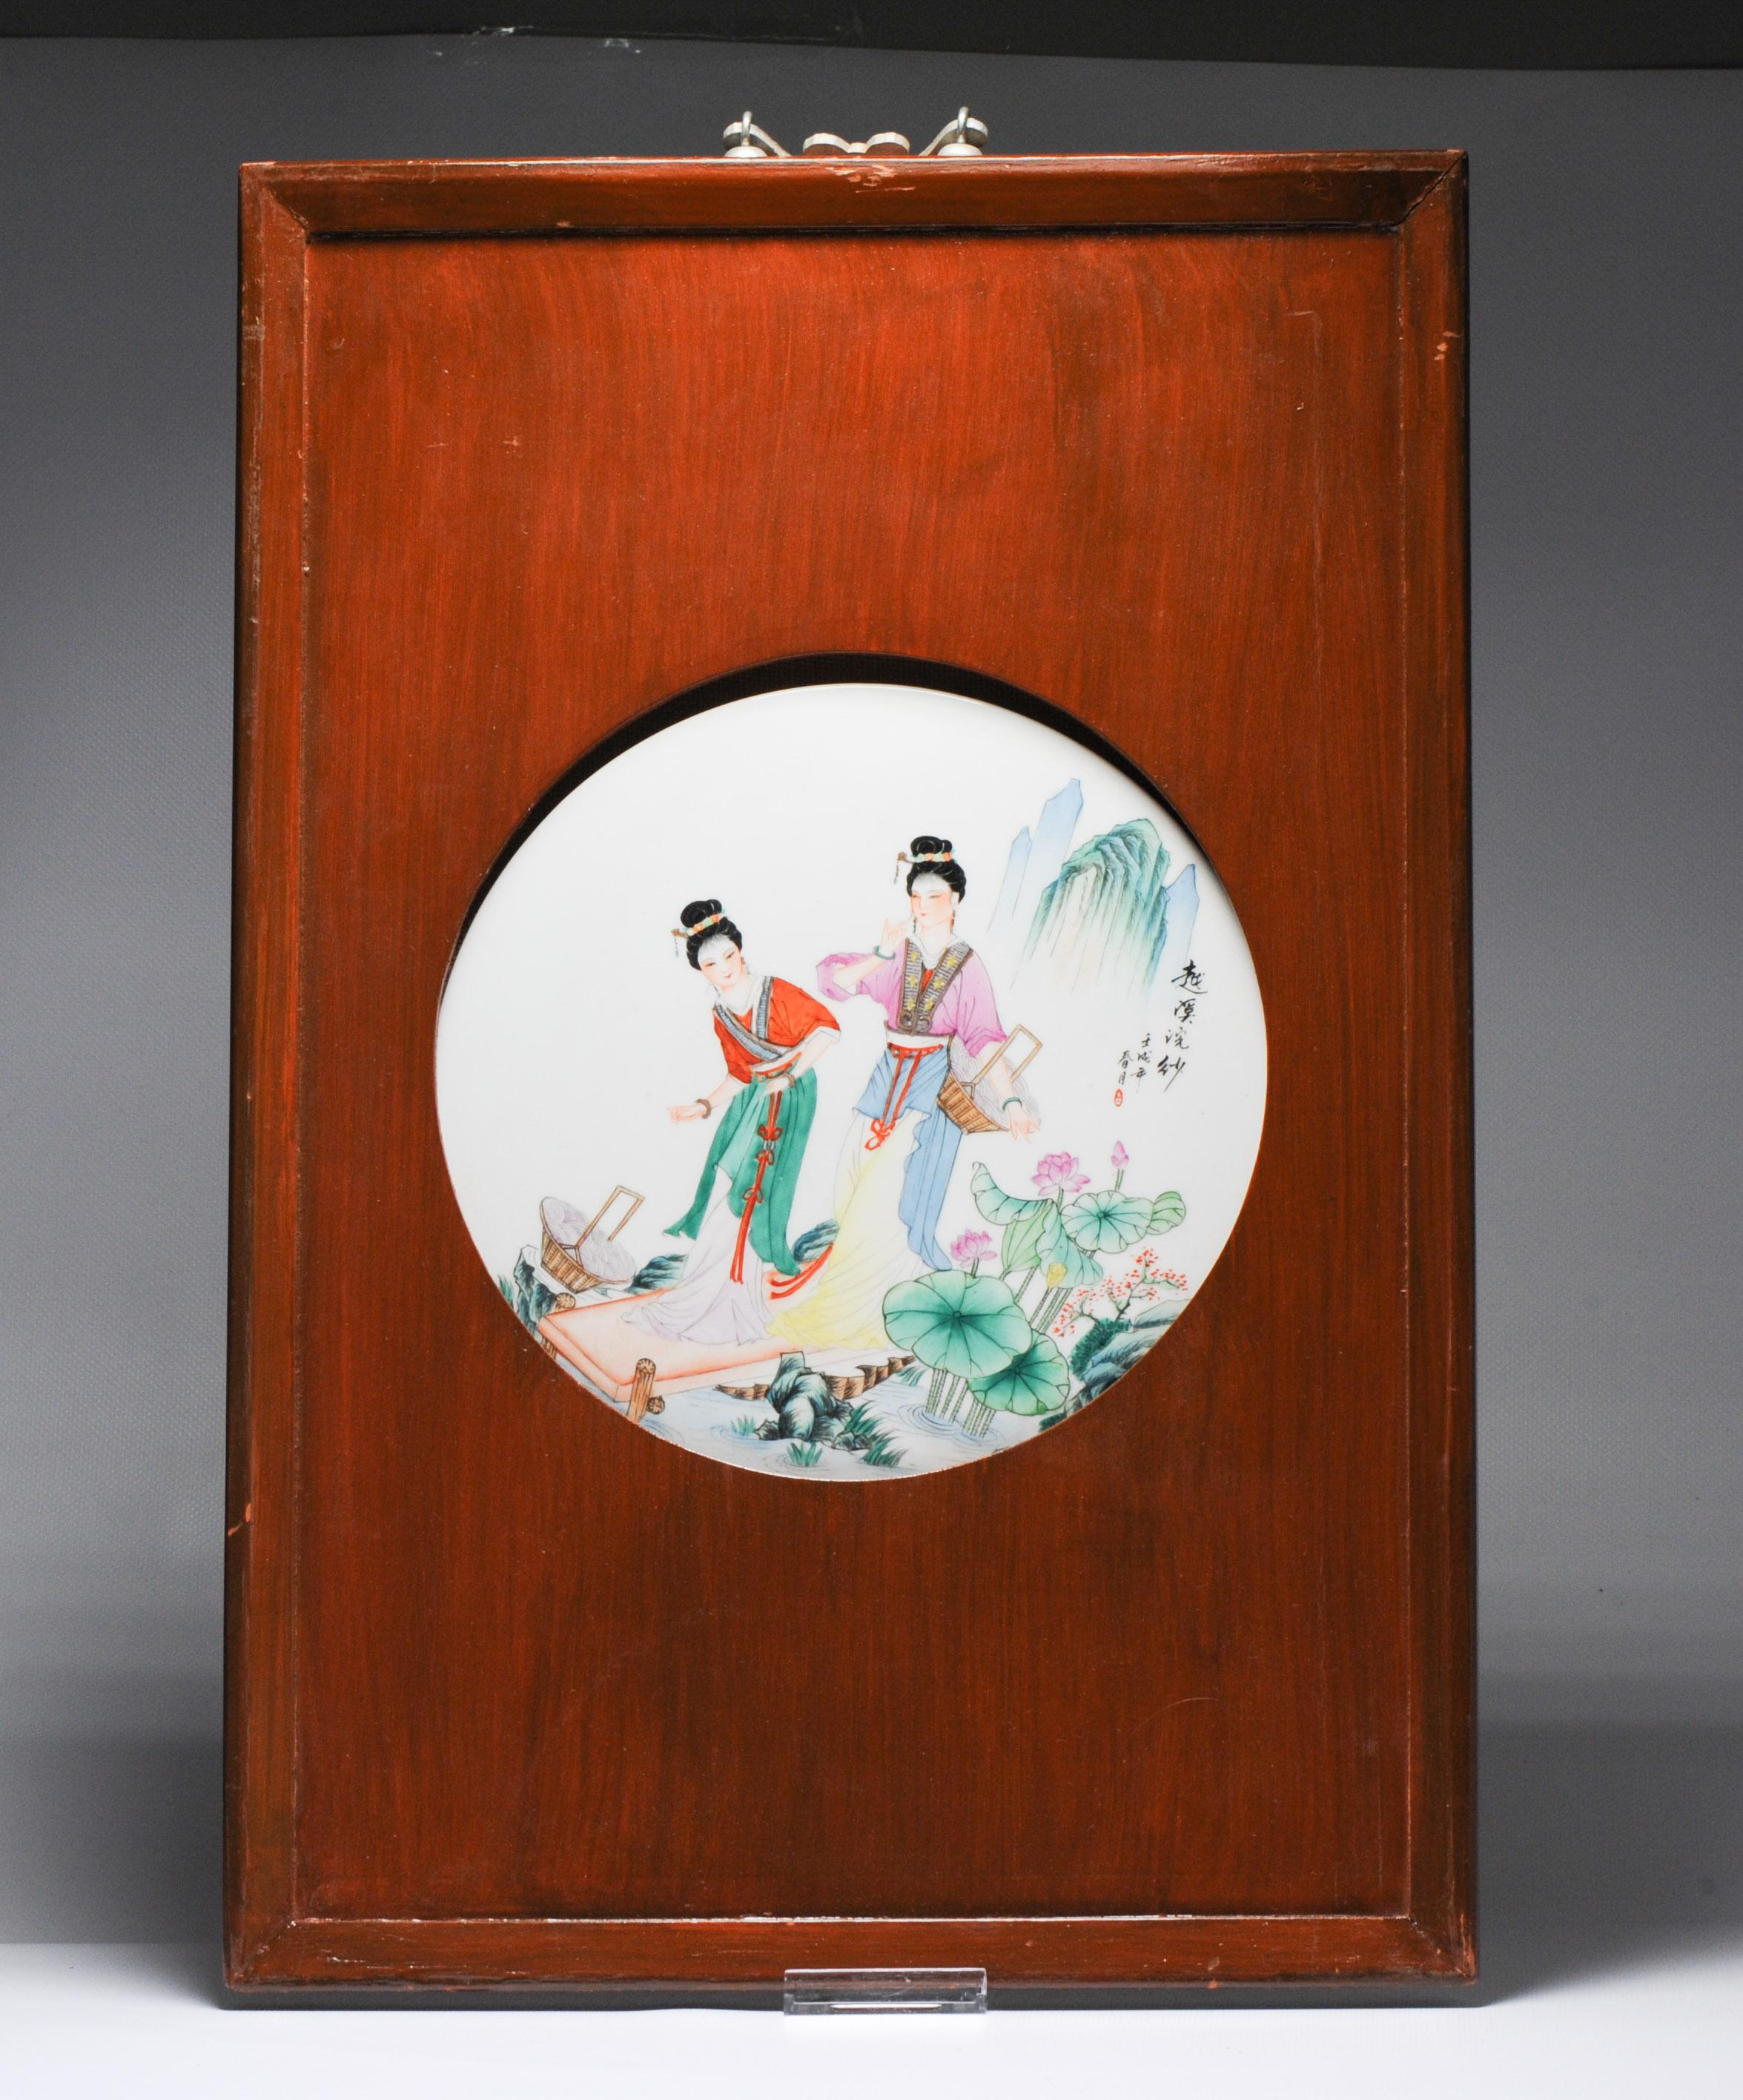 Lovely Chinese porcelain plaques. Dating to the 1970's or 80's.

Condition
Overall Condition porcelain perfect, frame with some age signs. Size 377 x 580 mm D X H

Period
20th century PROC (1949 - now).

 